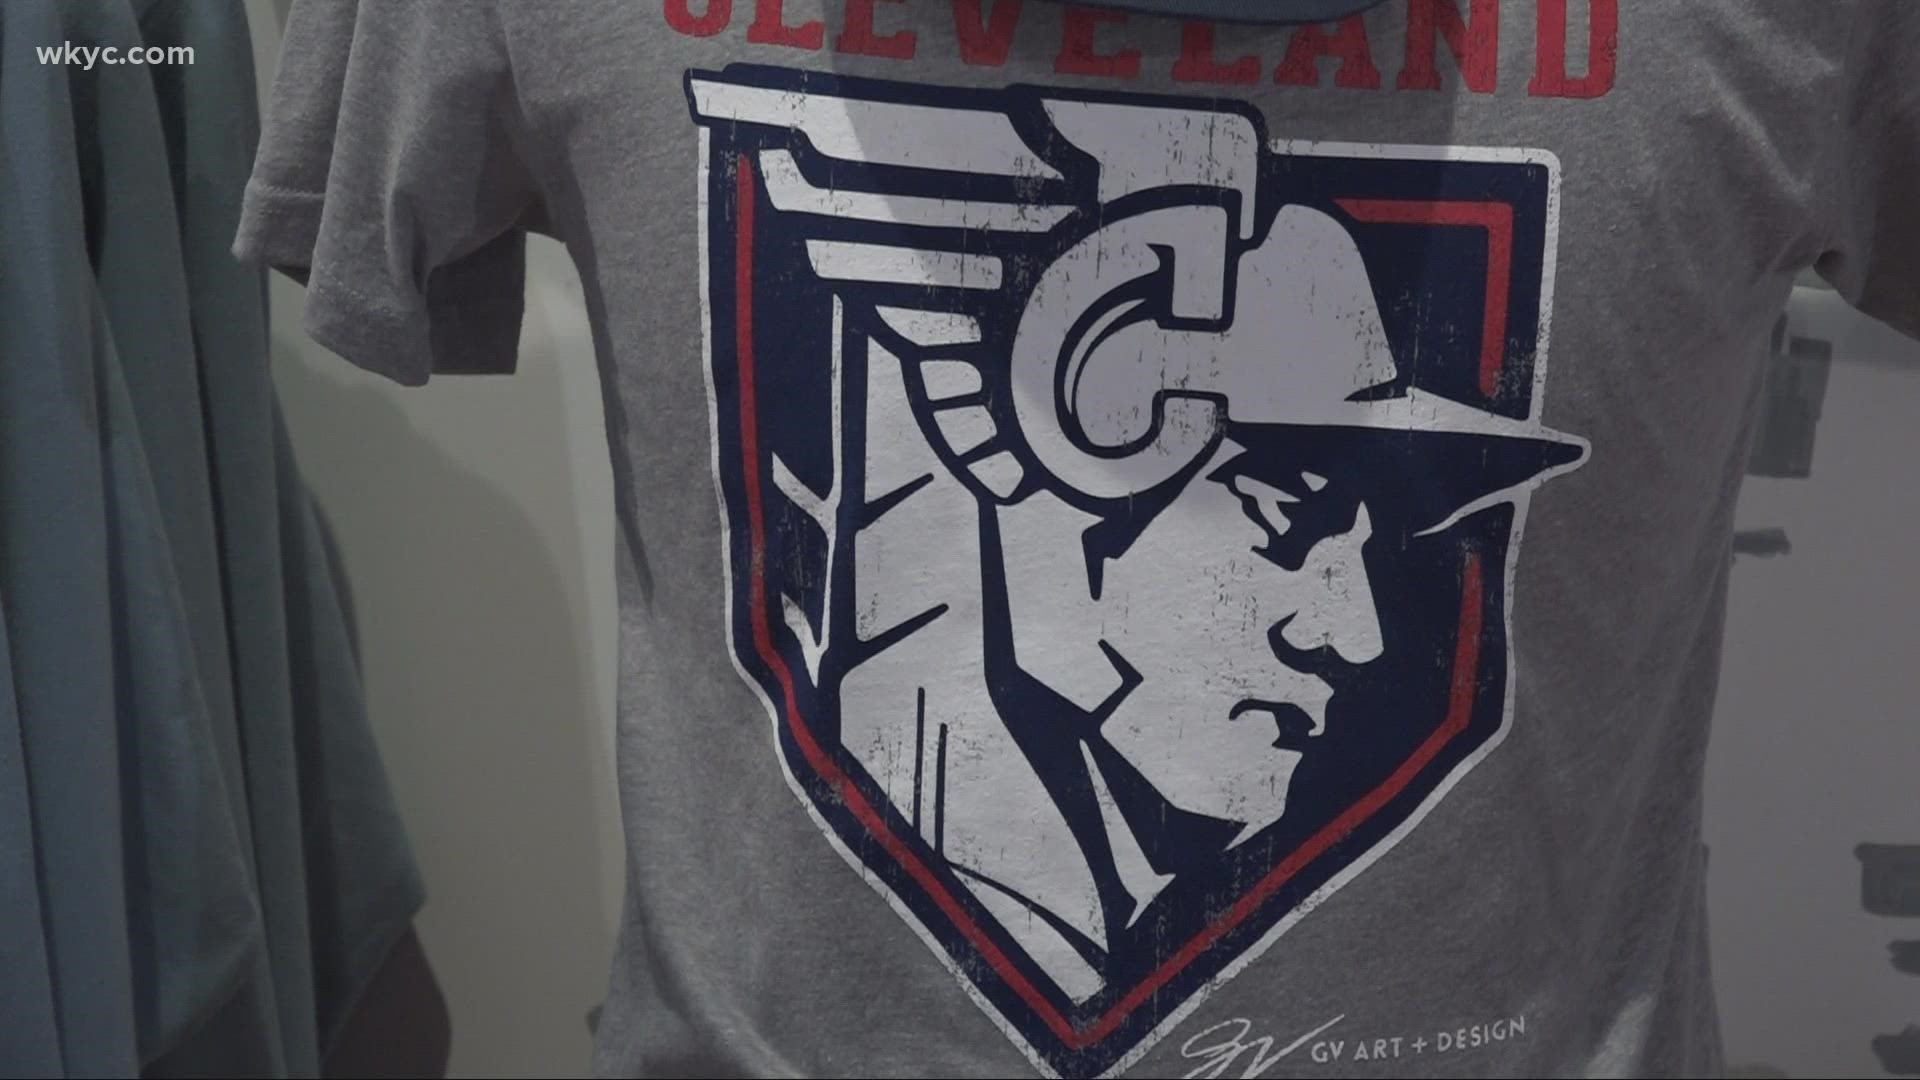 GV Art and Design says they'll pivot and stay flexible as they wait to drop new Cleveland Guardians gear.